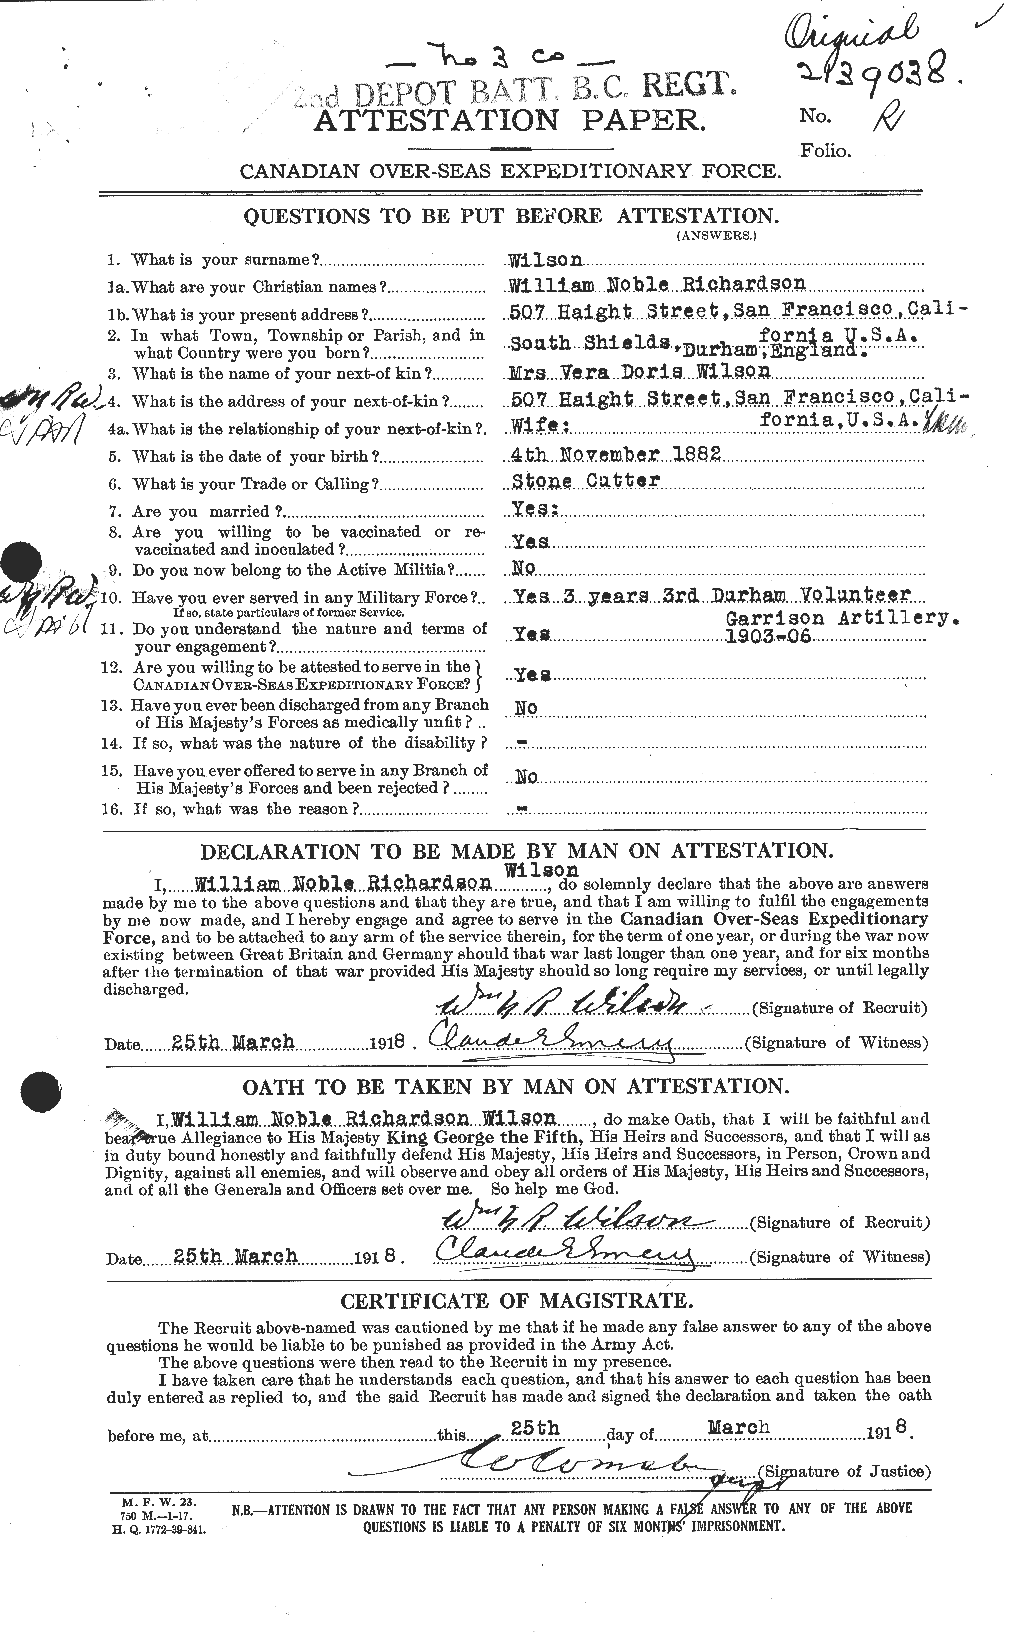 Personnel Records of the First World War - CEF 684082a